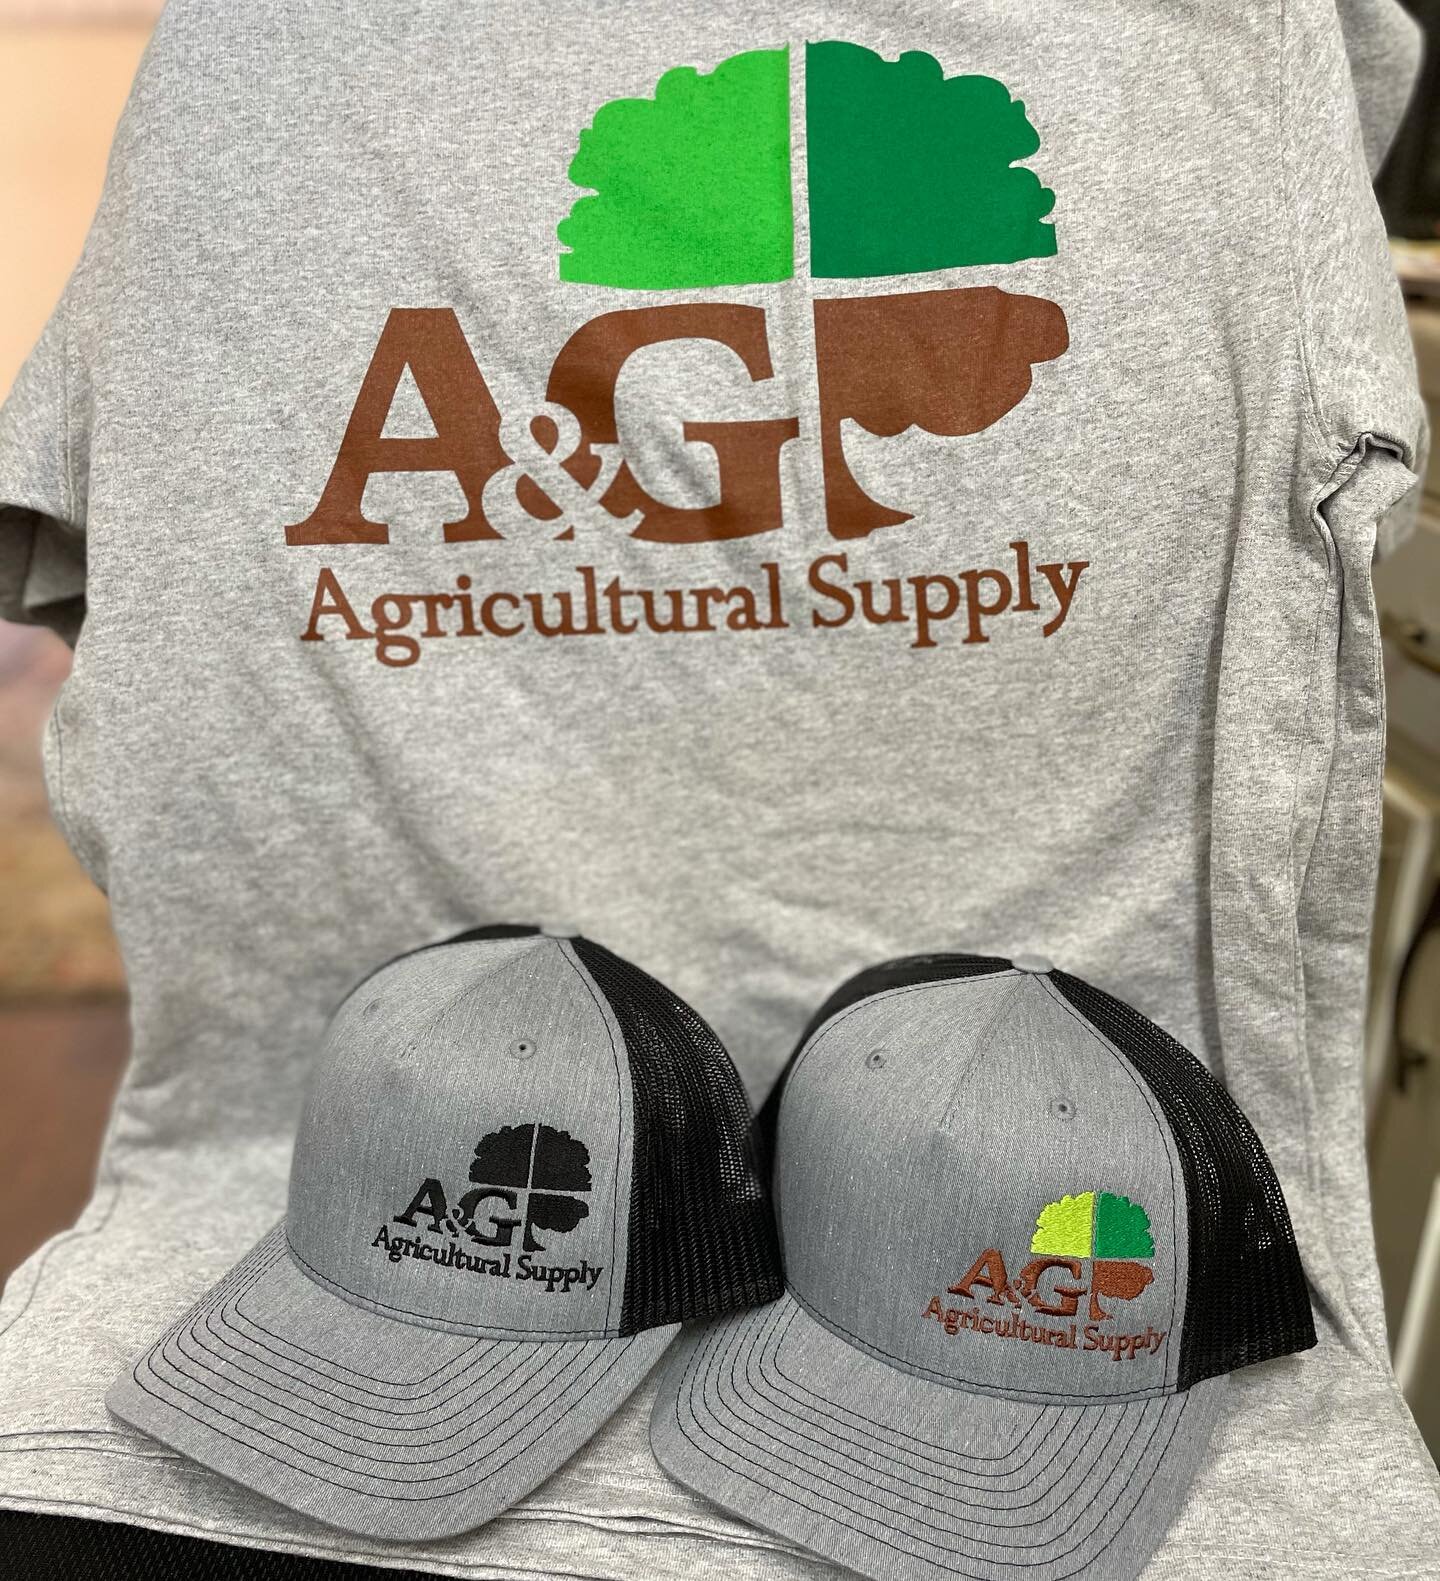 Fresh off the press, new gear for our team! Look good, feel good! #caag #agsupply #stakes #aandgagsupply #growers #wholesalenursery #wholesalelandscapesupply